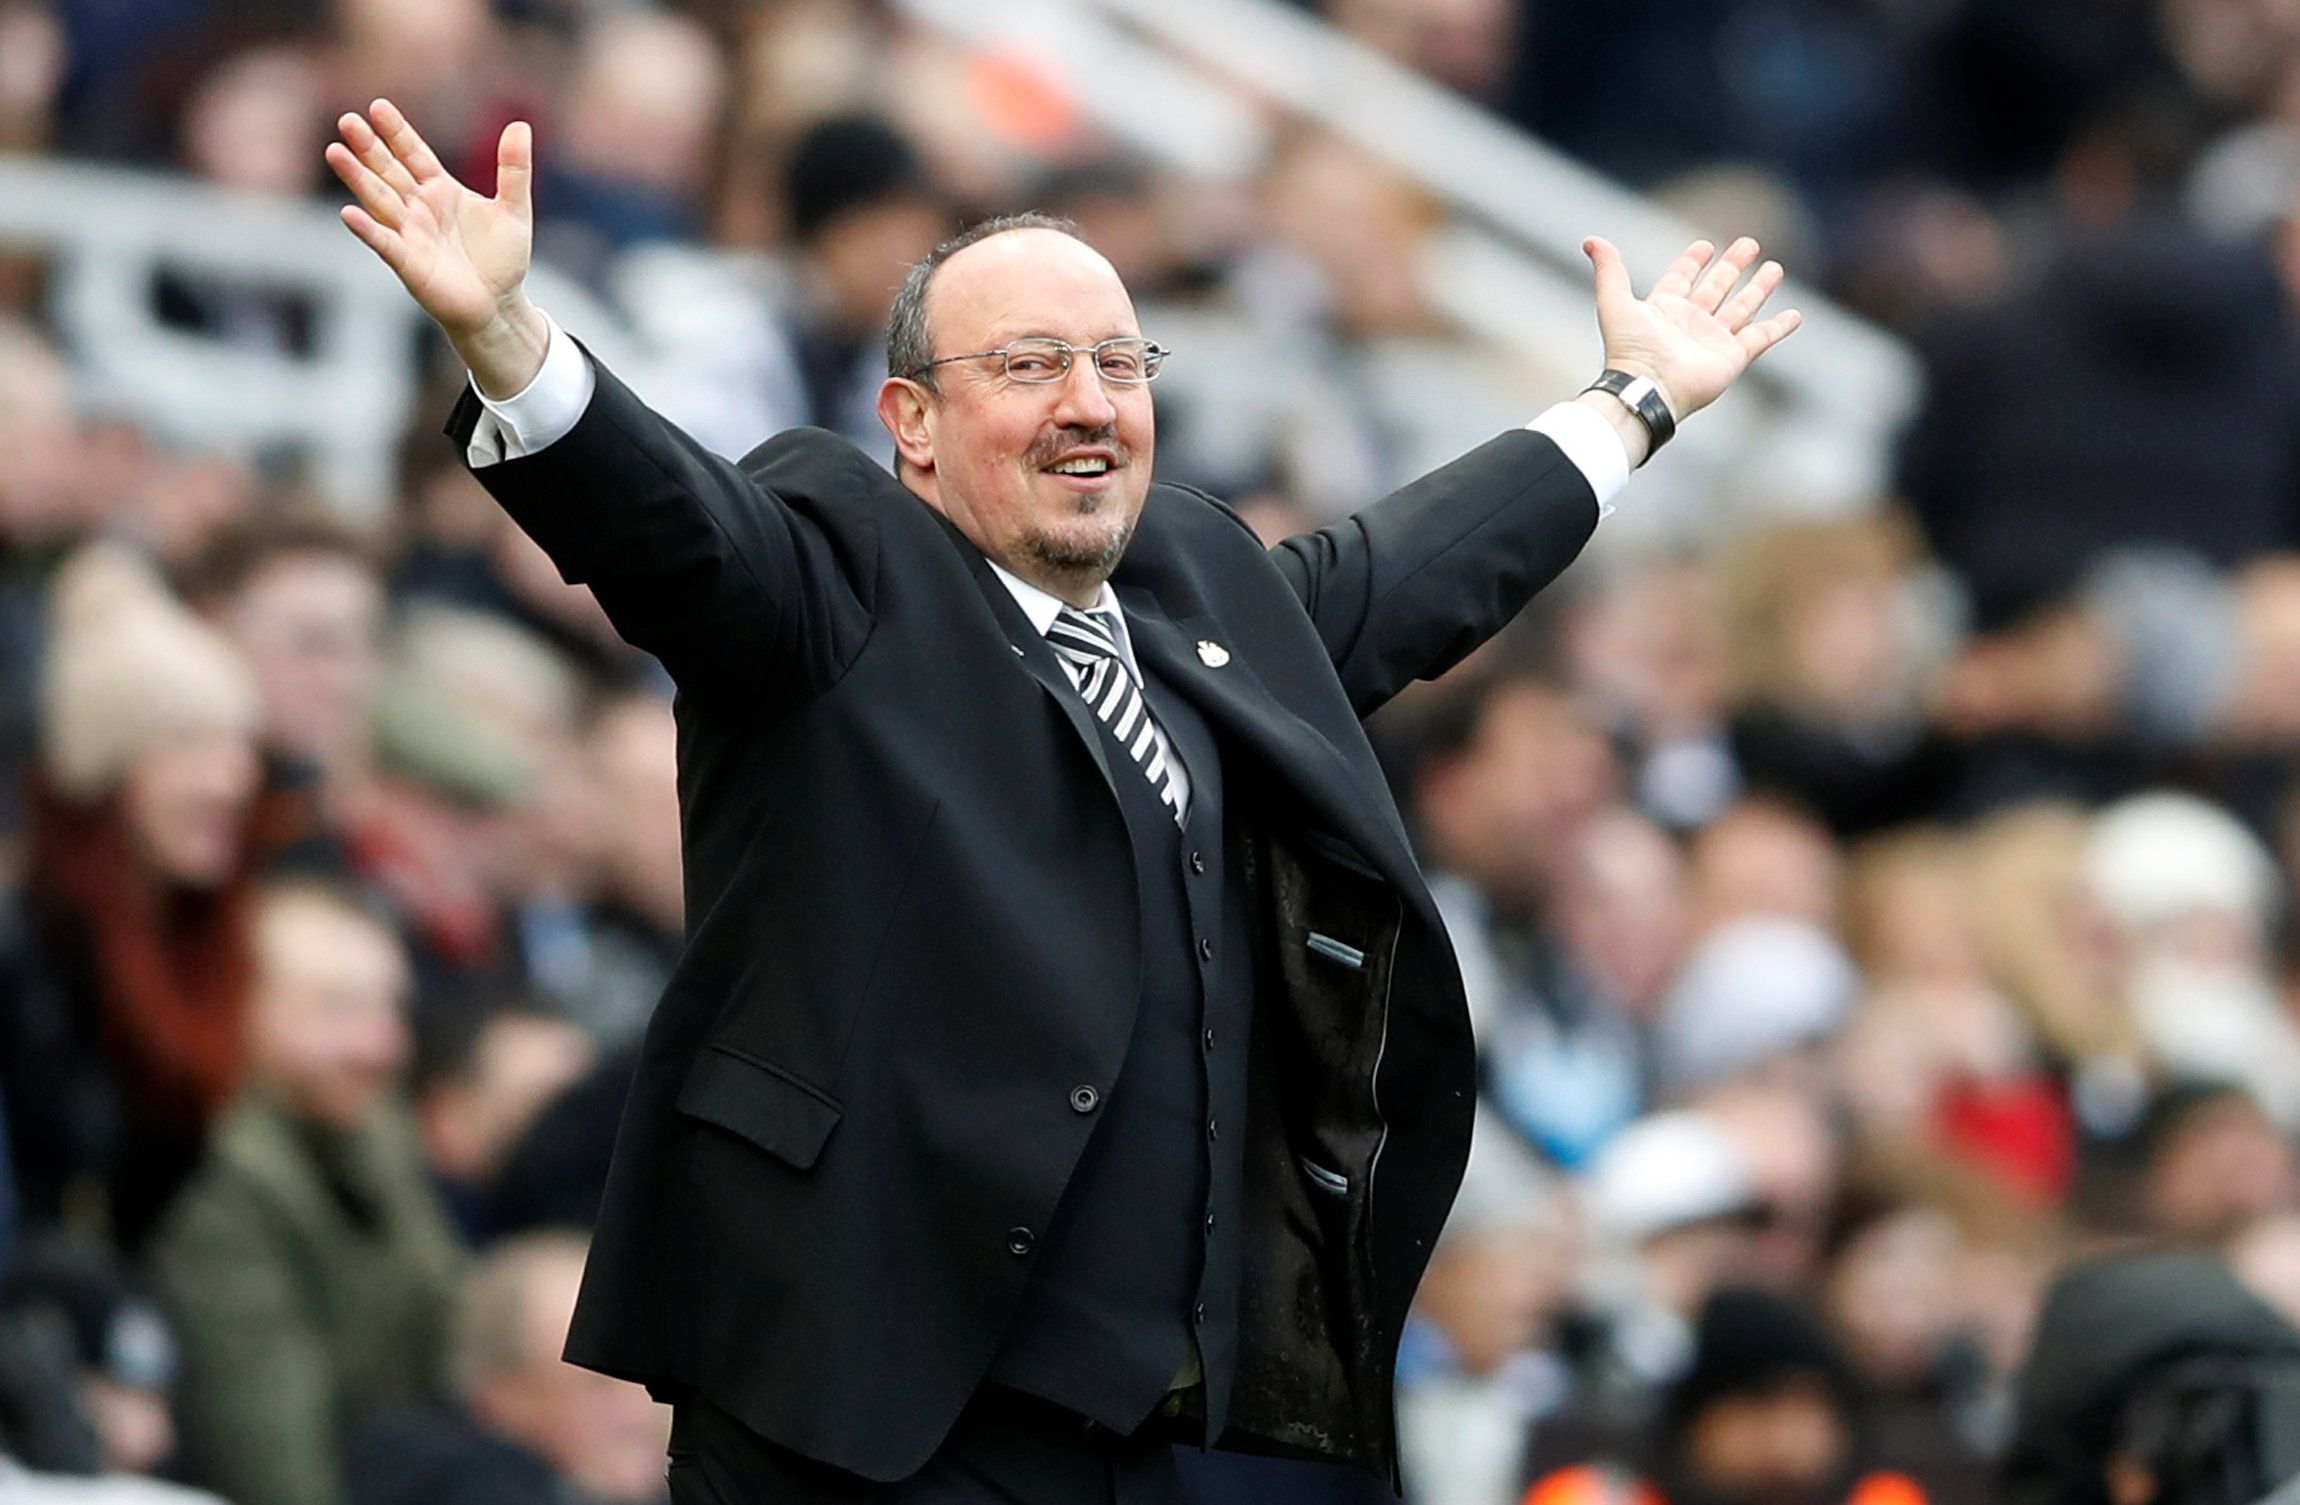 Soccer Football - Premier League - Newcastle United vs Manchester United - St James' Park, Newcastle, Britain - February 11, 2018   Newcastle United manager Rafael Benitez reacts   Action Images via Reuters/Carl Recine    EDITORIAL USE ONLY. No use with unauthorized audio, video, data, fixture lists, club/league logos or 